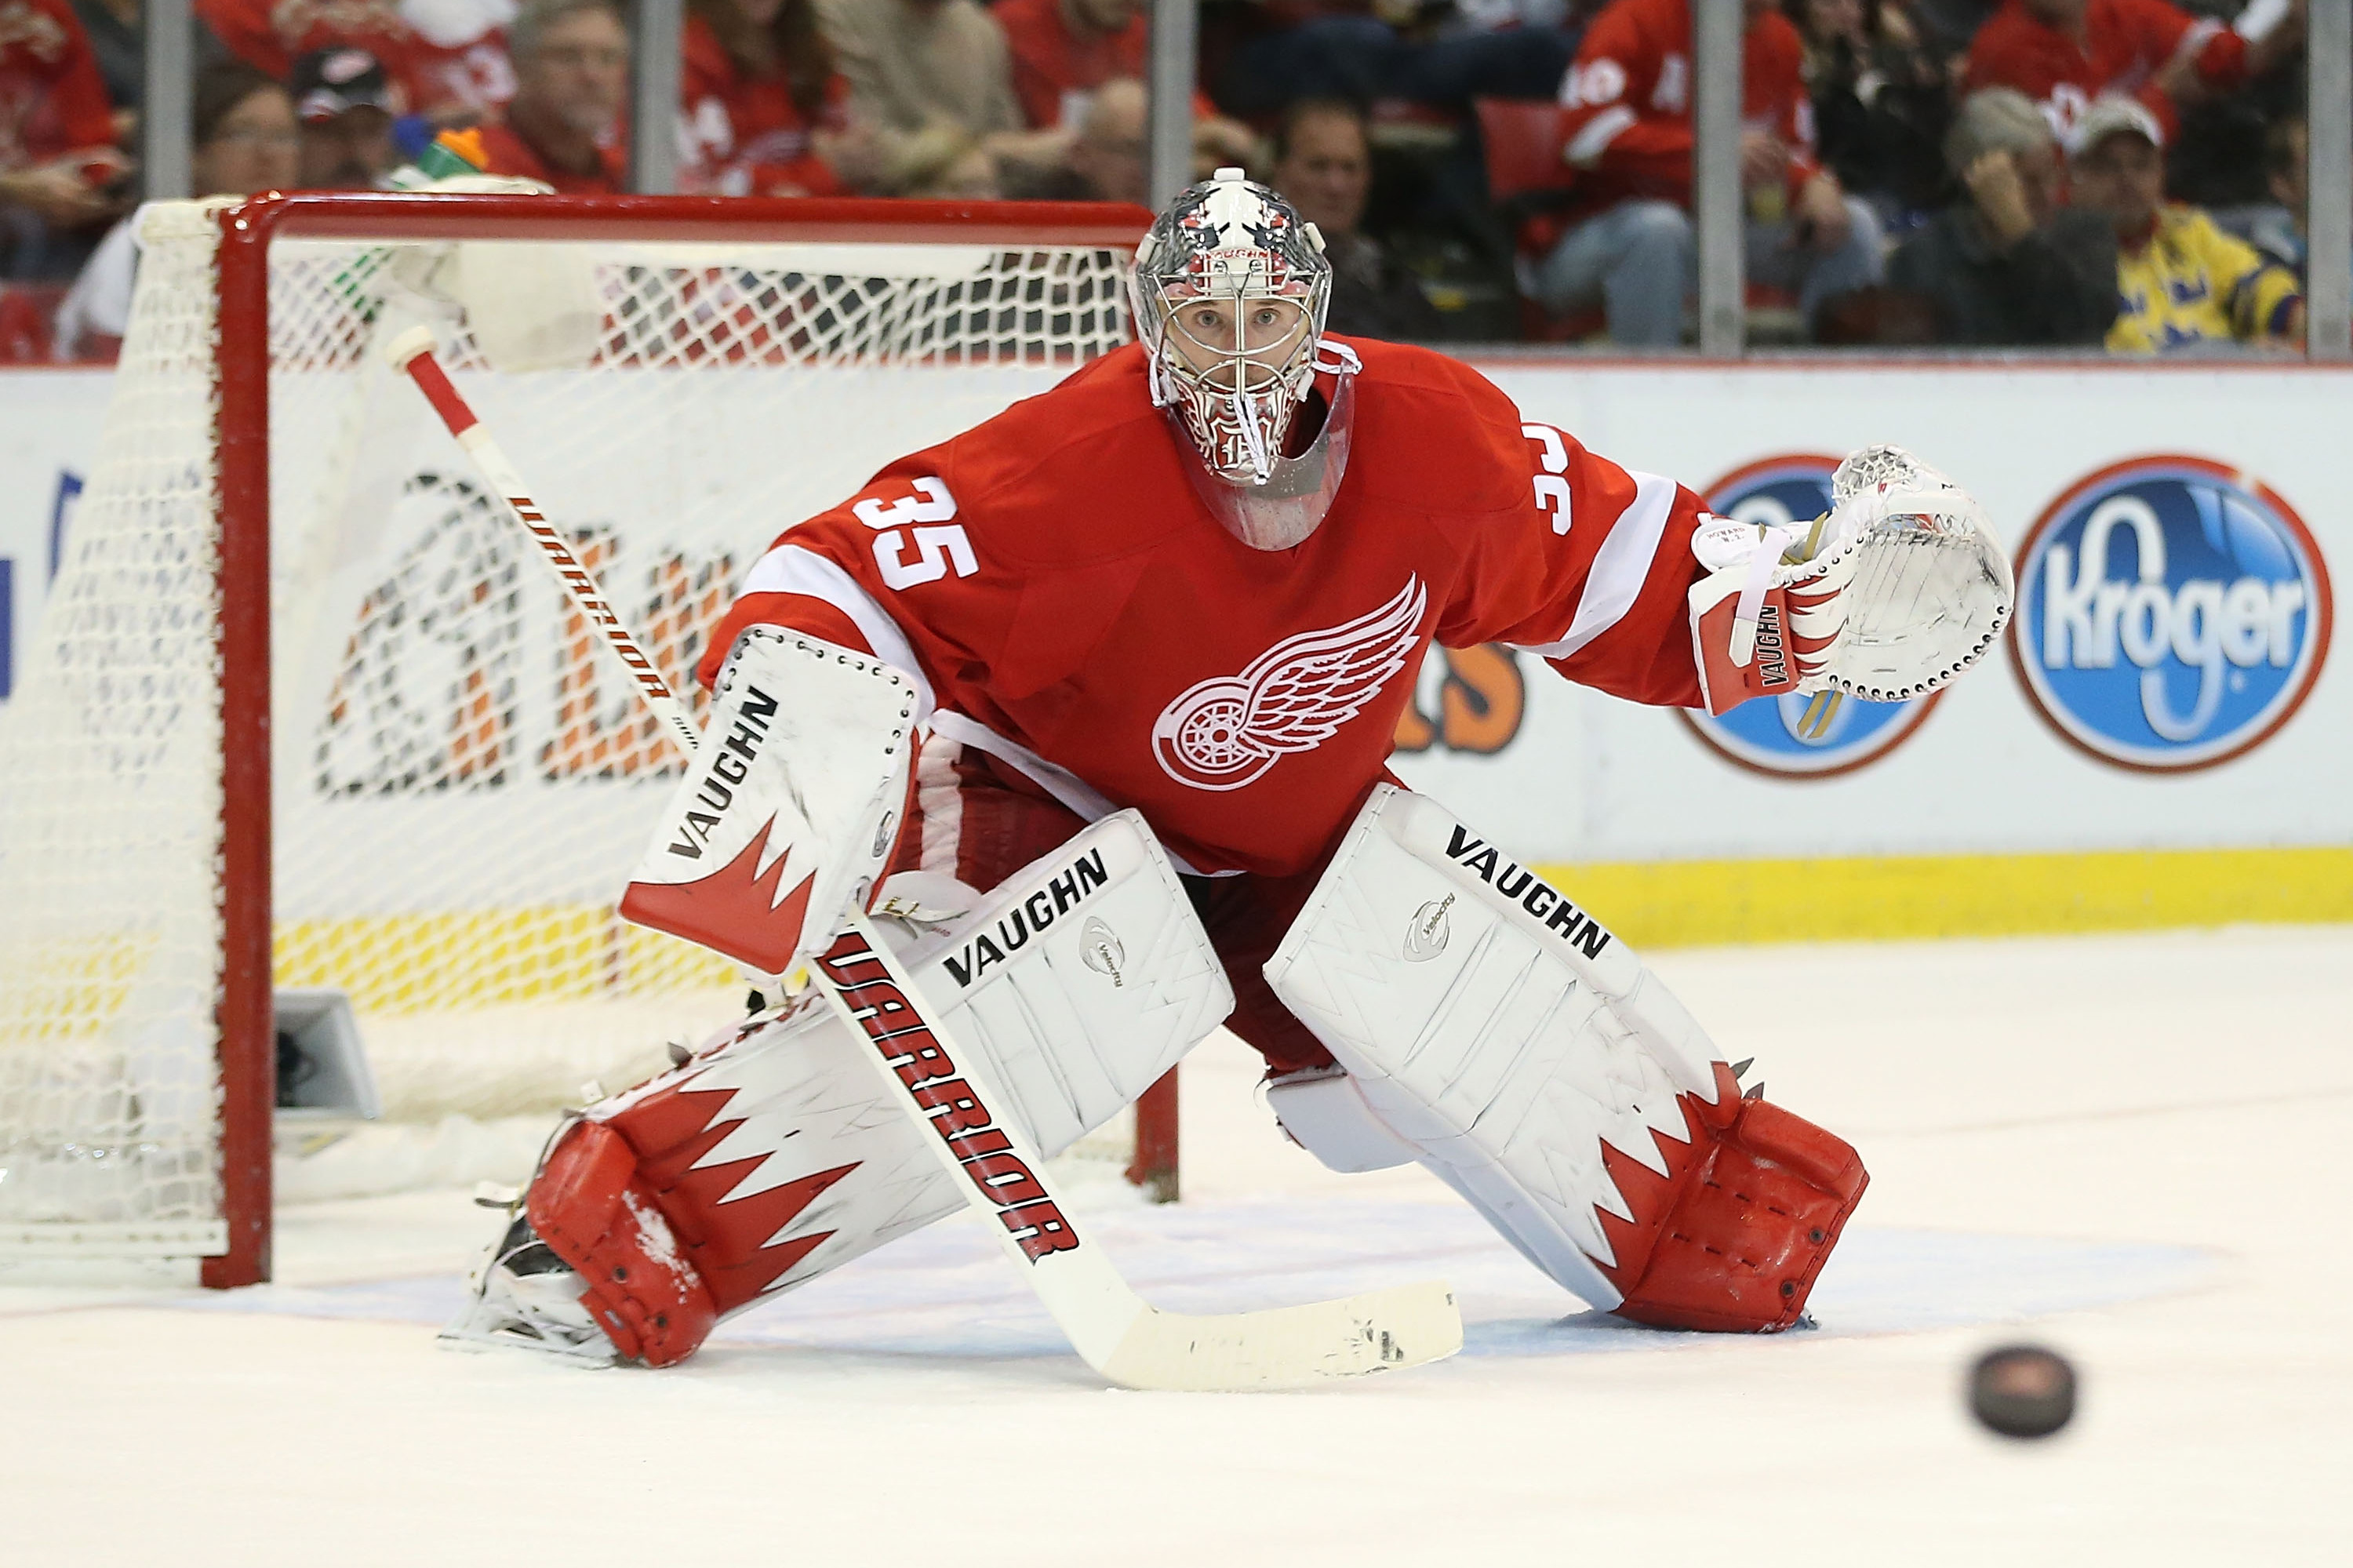 Jimmy Howard placed on Red Wings' injured reserve